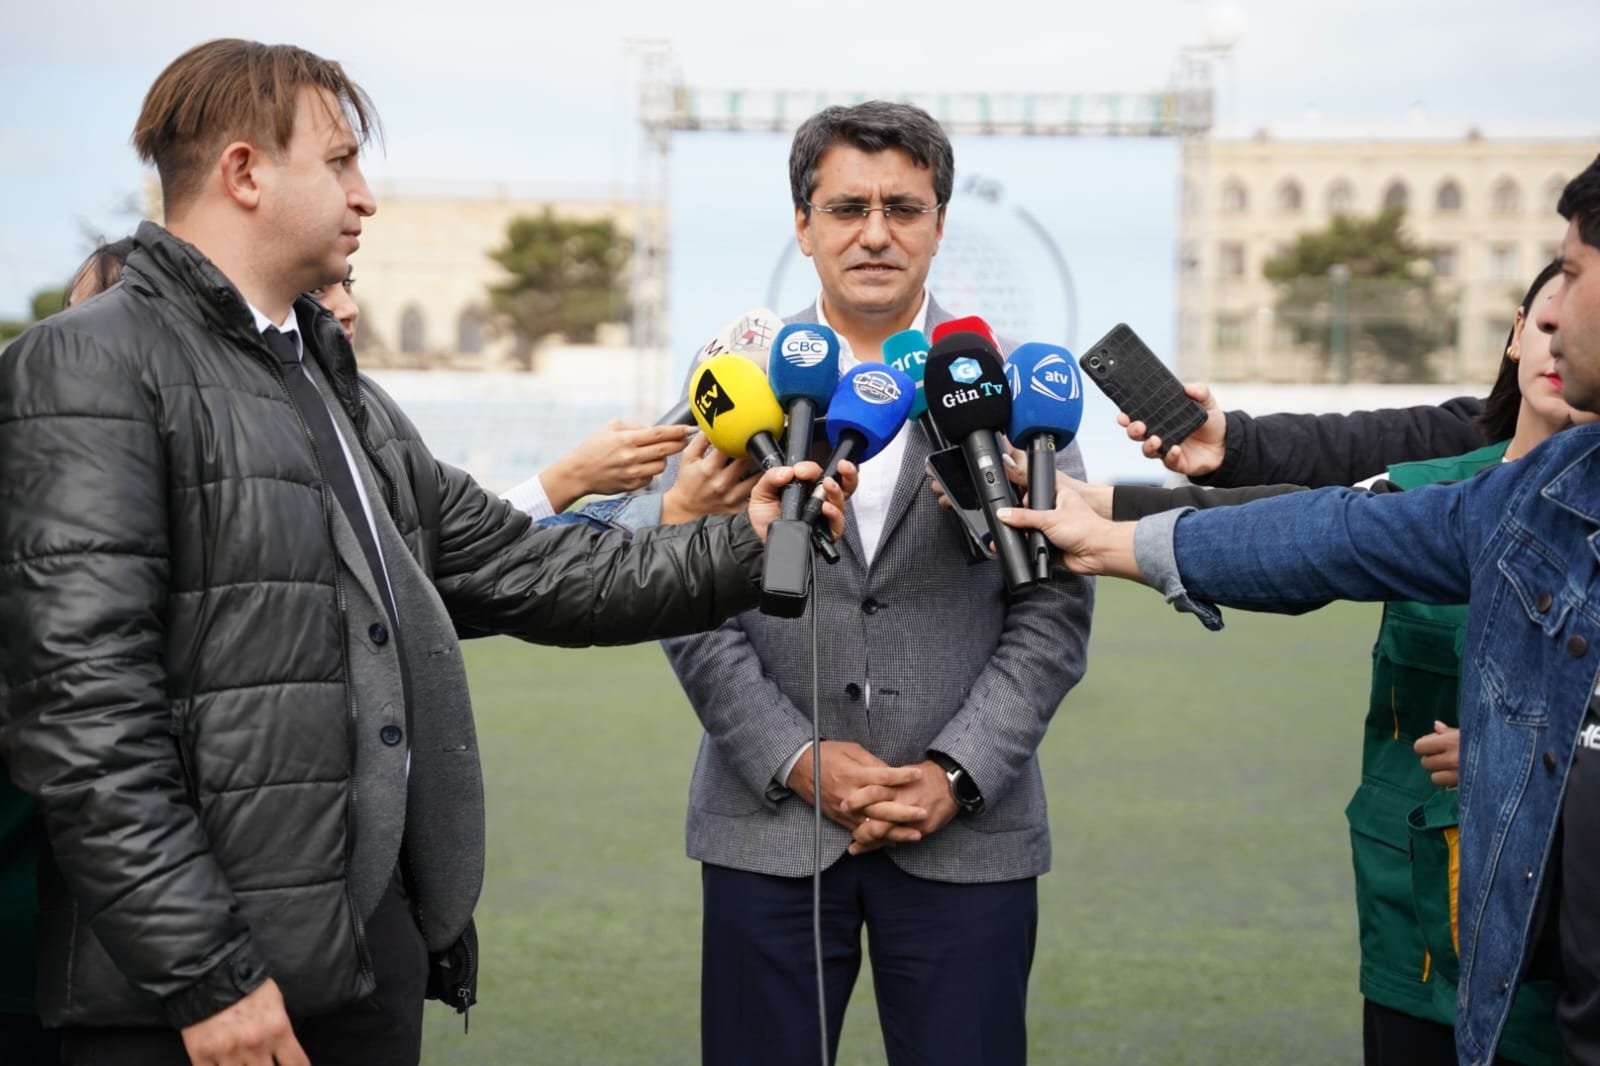 Elnur Mammadov: "The main goal of this initiative is to contribute to the development of football"